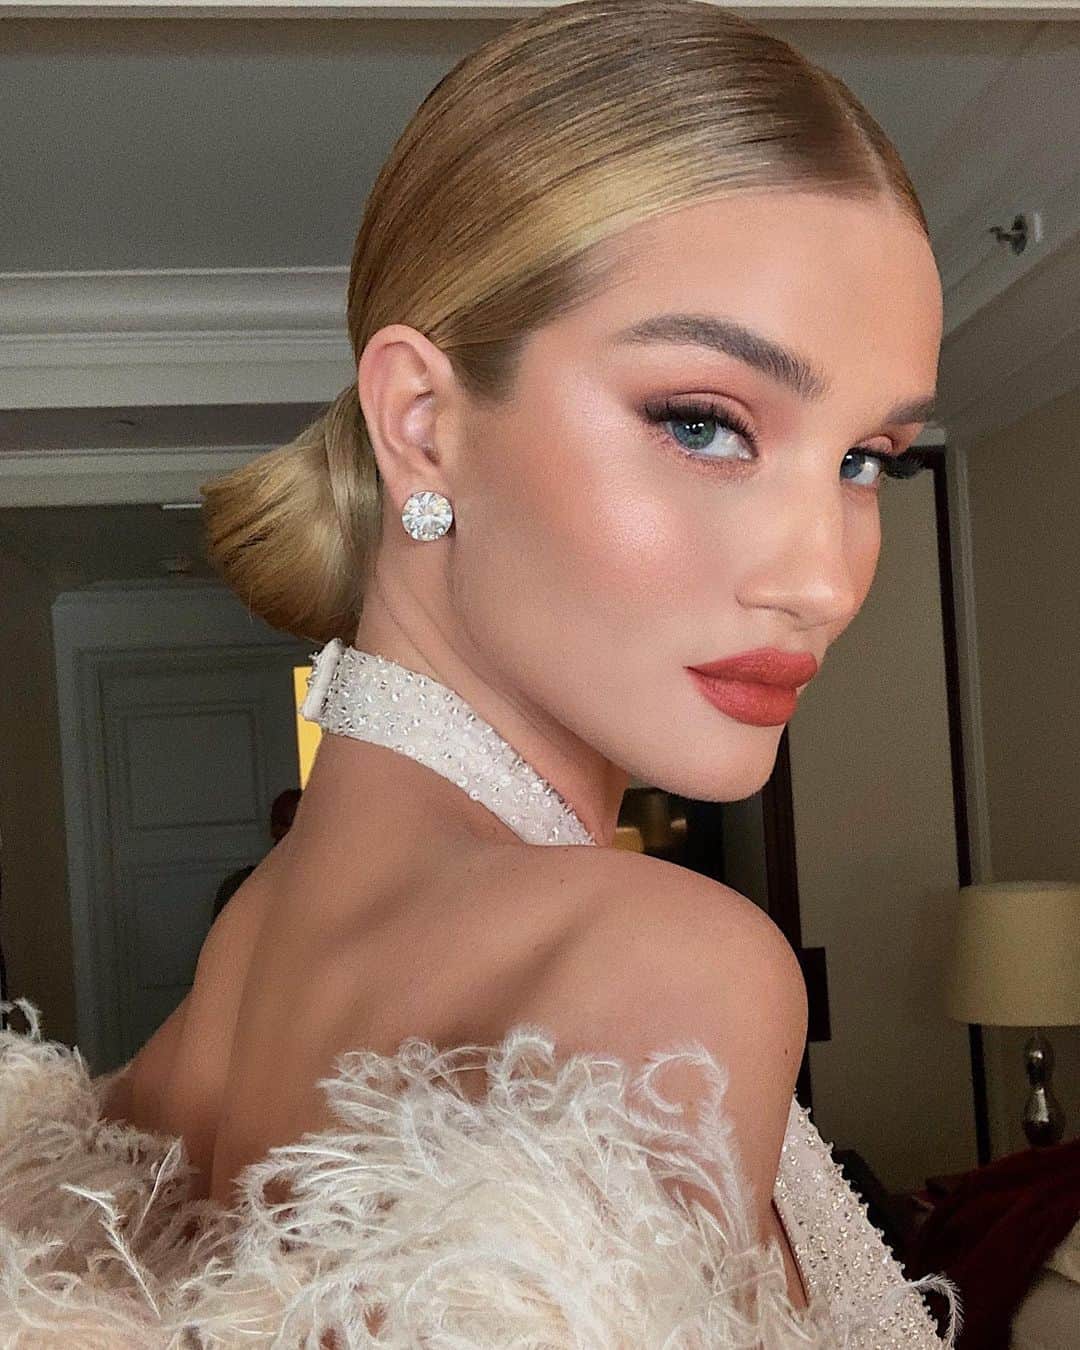 Hung Vanngoさんのインスタグラム写真 - (Hung VanngoInstagram)「@rosiehw tonight for #MetGala2019 🧡🧡⚡️💫✨. Styled by @emmajademorrison @oscardelarenta 💅🏻 @ginaedwards_ 💇 @cwoodhair 💄 @hungvanngo using @chanel.beauty  @welovecoco #welovecoco #workingwithchanel Here is the products breakdown: SKIN PREP: Hydra Beauty Micro Liquid Essence Hydra Beauty Camellia Water Cream Illuminating Hydrating Fluid Hydra Beauty Micro Gel Yeux Intense Smoothing Eye Gel Hydra Beauty Nourishing Lip Care Hydra Beauty Essence Mist  COMPLEXION: Les Beiges Eau de Teint Foundation in “Medium Light” Le Correcteur de Chanel Longwear Concealer in shade “20” Soleil Tan de Chanel  Poudre Universelle Libre Natural Finish Loose Powder in shade “20”  CHEEKS: Poudre Lumiere in “30" Joues Contraste Powder Blush in shade “71 Malice"  BROWS: Stylo Soucils Waterproof in shade “806” Lê Gel Sourcils in shade “350”  EYES: Stylo Yeux Waterproof in shade “943 Brun Agape” Les 4 Ombré in “Lumieres Naturalles” Inimitable Intense Multi-Dimentionnel Sophistique Mascara in "10 Noir”  LIPS: The mixture of Rouge Allure  Velvet Extrême in shades “112 Idéal & 122 Chestnut”.」5月7日 12時36分 - hungvanngo